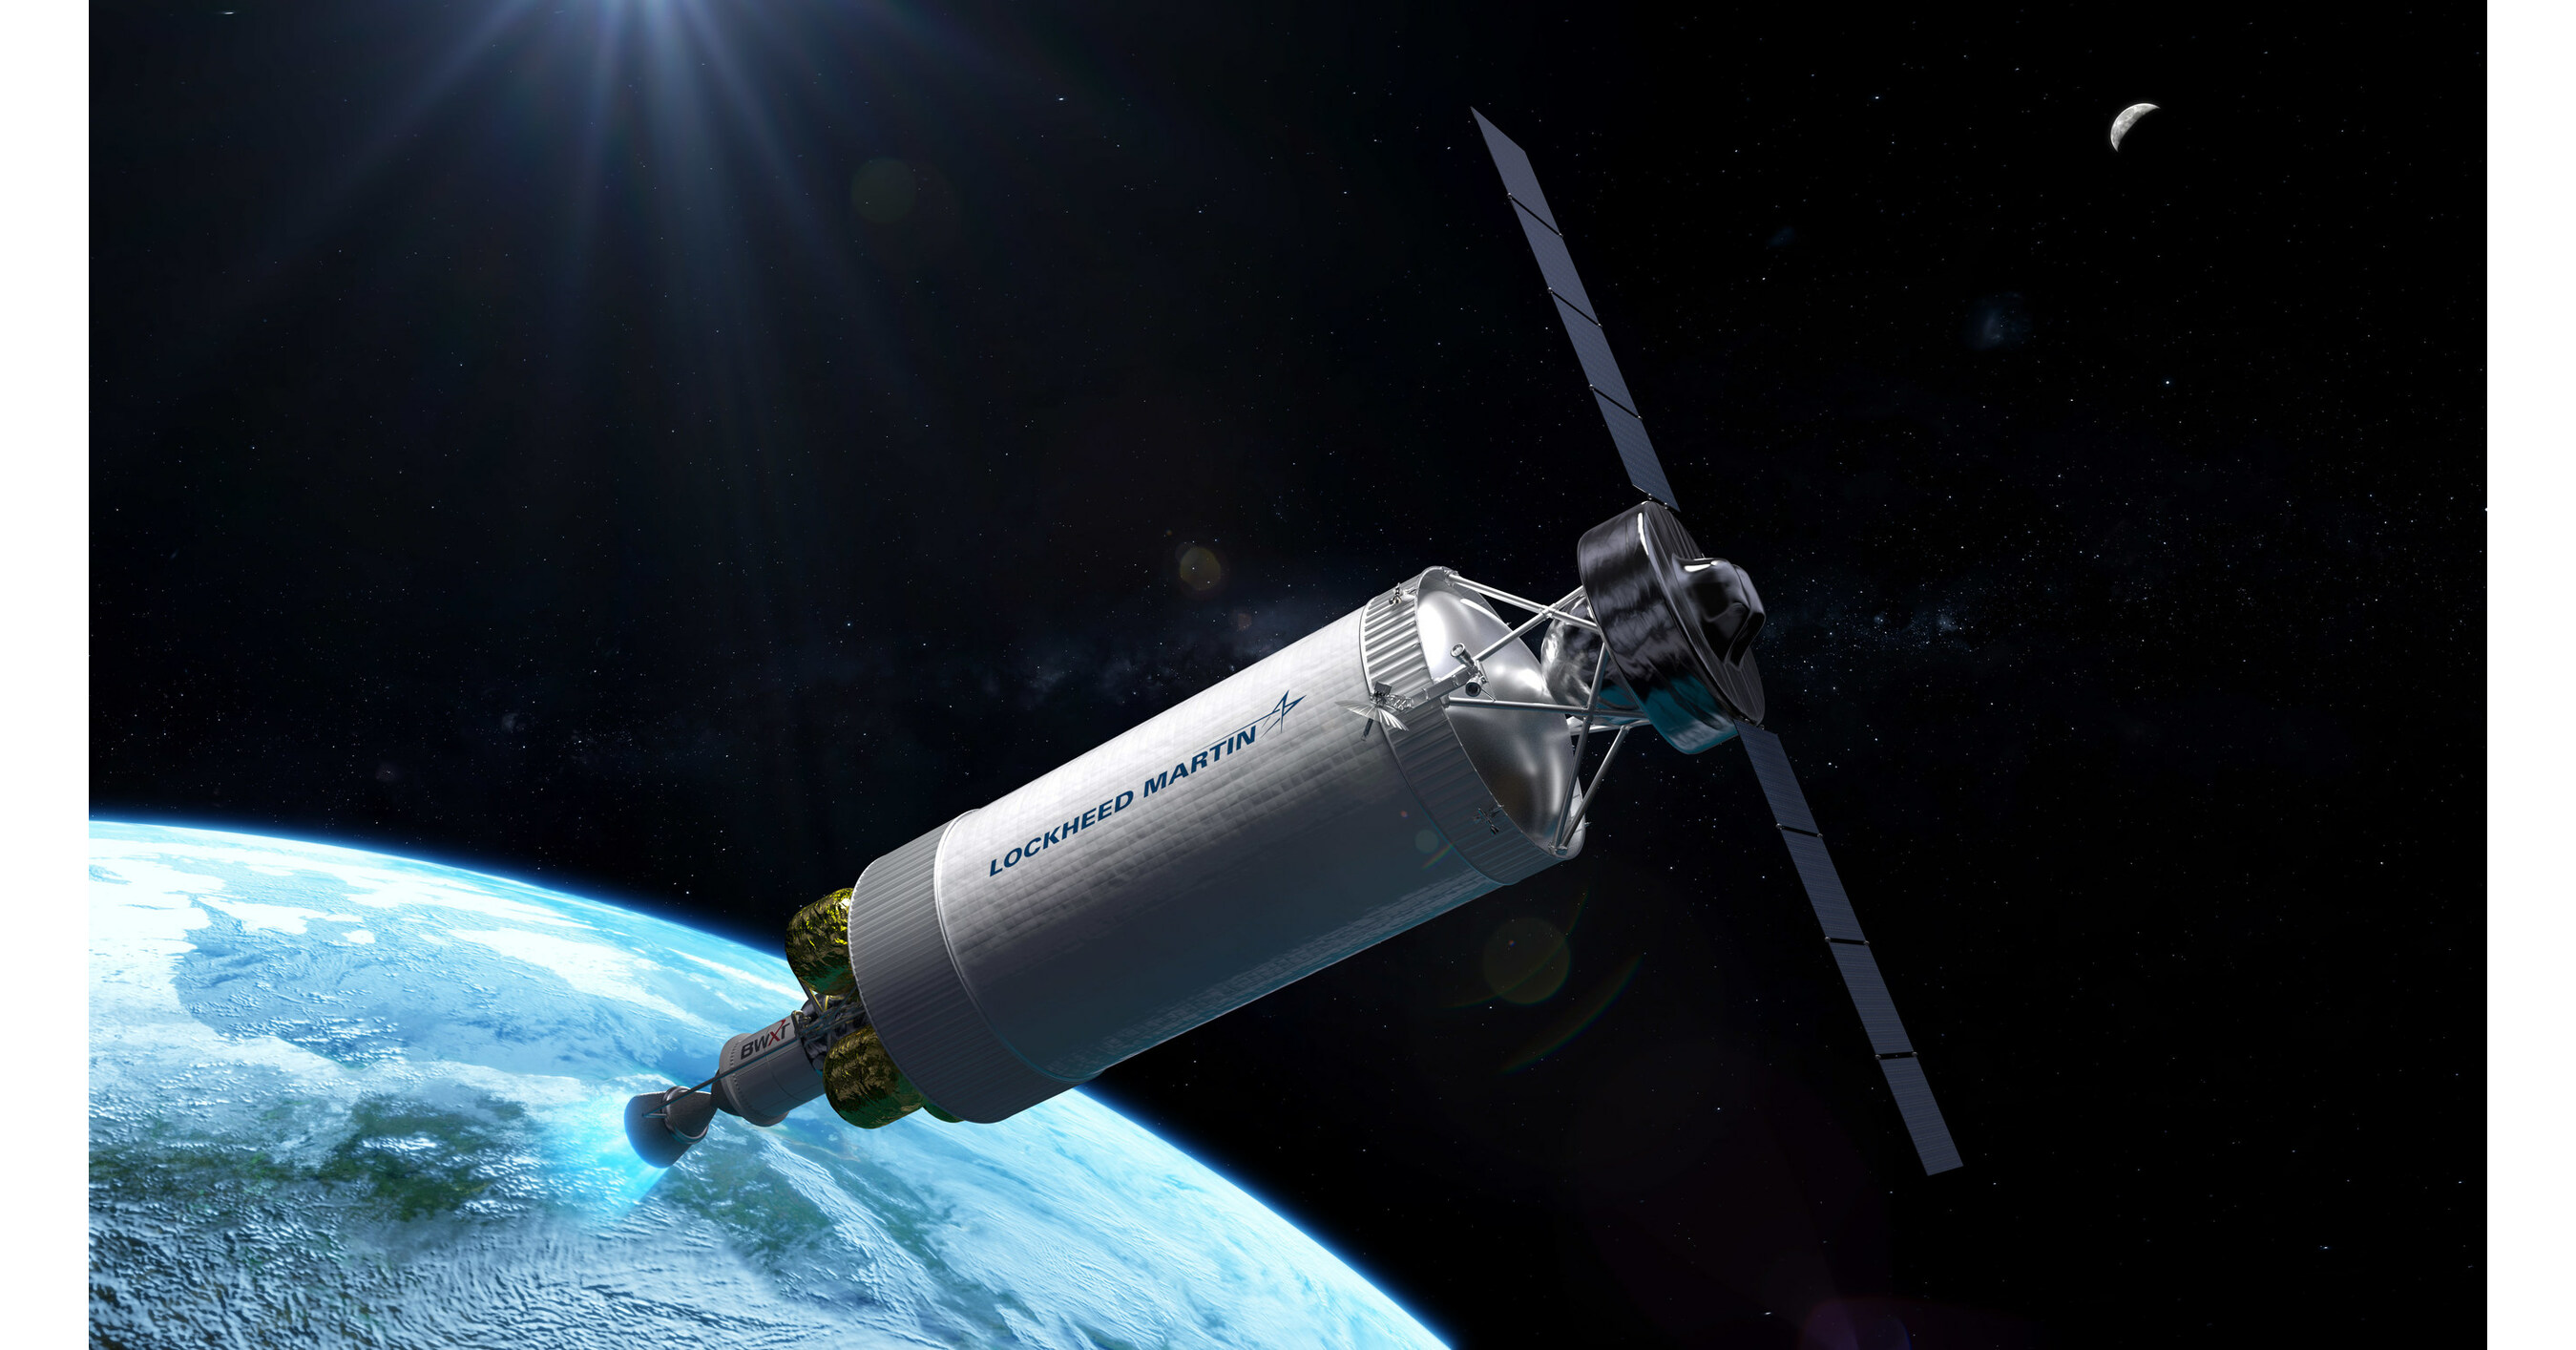 Lockheed Martin Selected to Develop Nuclear-Powered Spacecraft